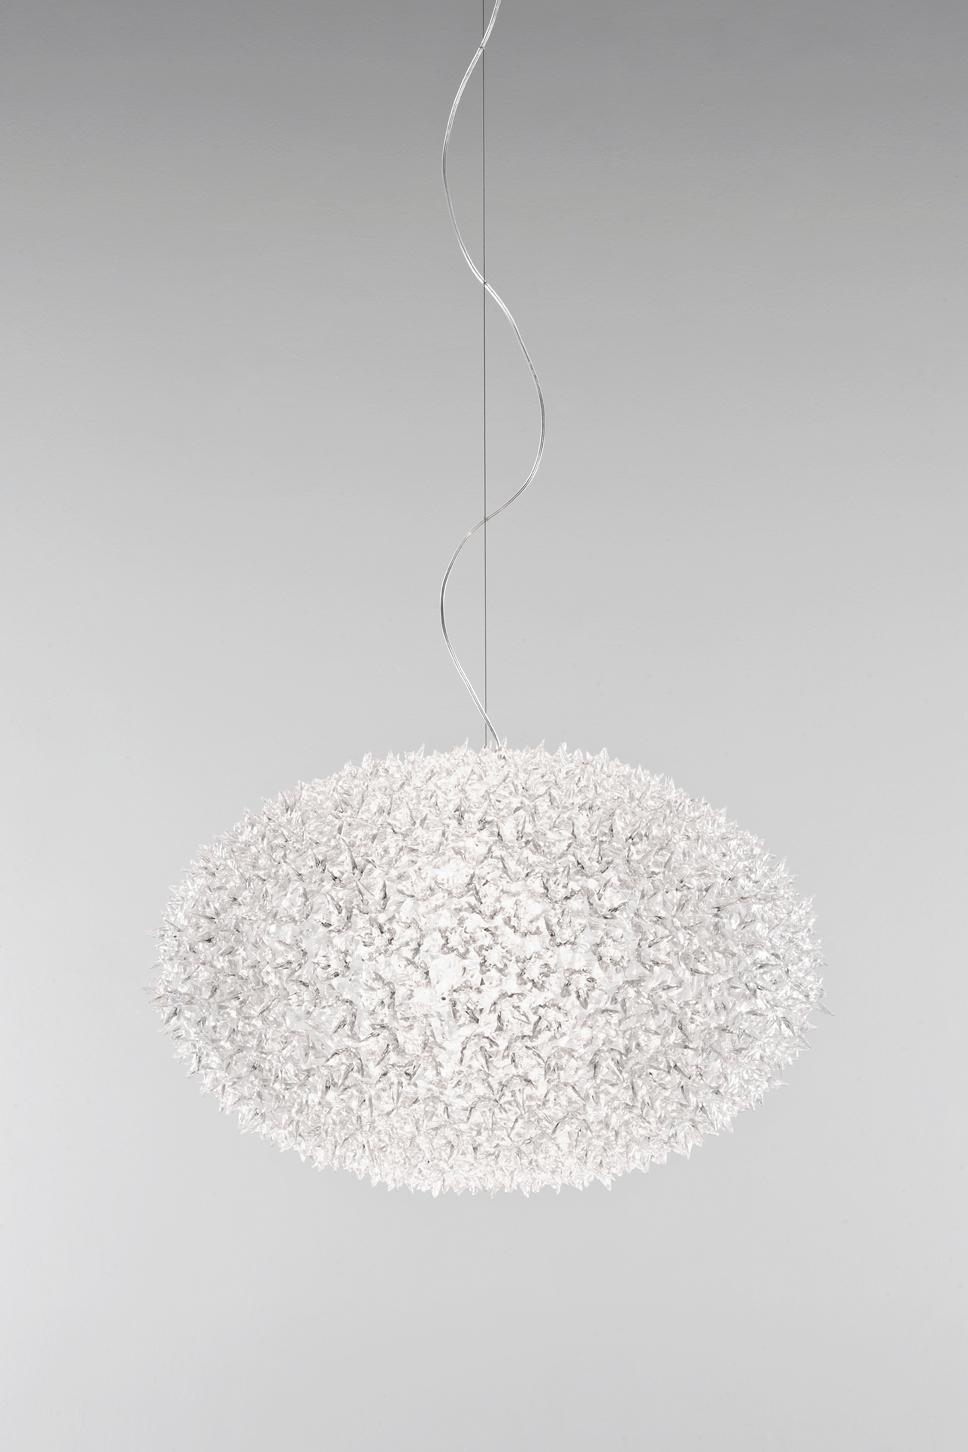 The Bloom New lamp family with its elliptical shape and distinctive original structure covered by sparkling polycarbonate flowers as pure and precious as crystal in hanging. As delicate as a spring bouquet, Bloom lights offer new and sophisticated